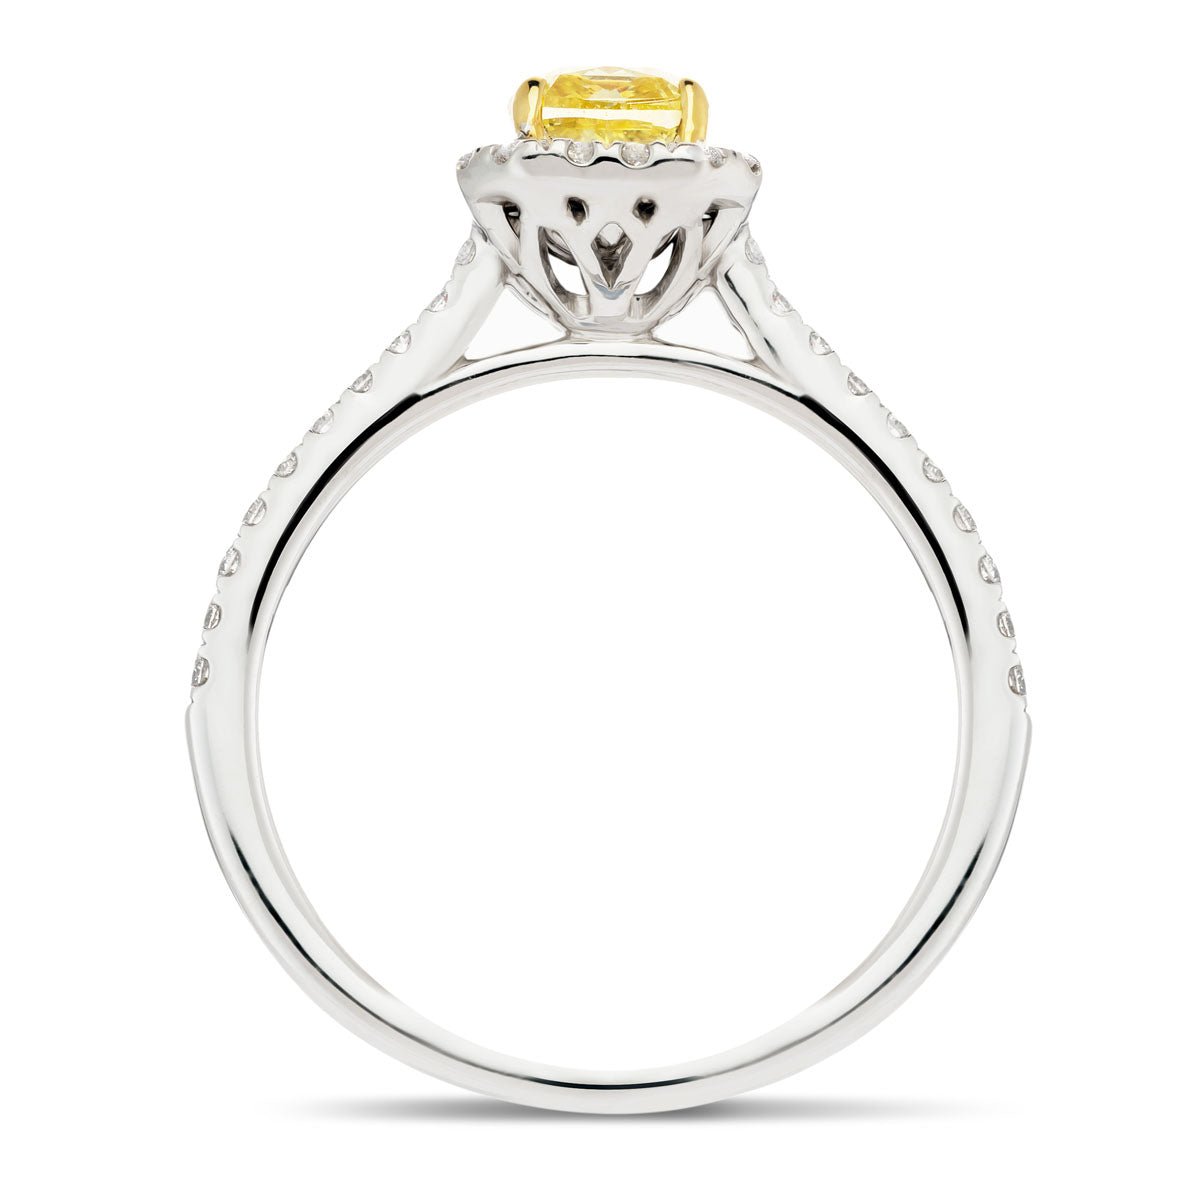 Certified Cushion Yellow Diamond Engagement Ring 0.80ct Ring in 18k White Gold - All Diamond